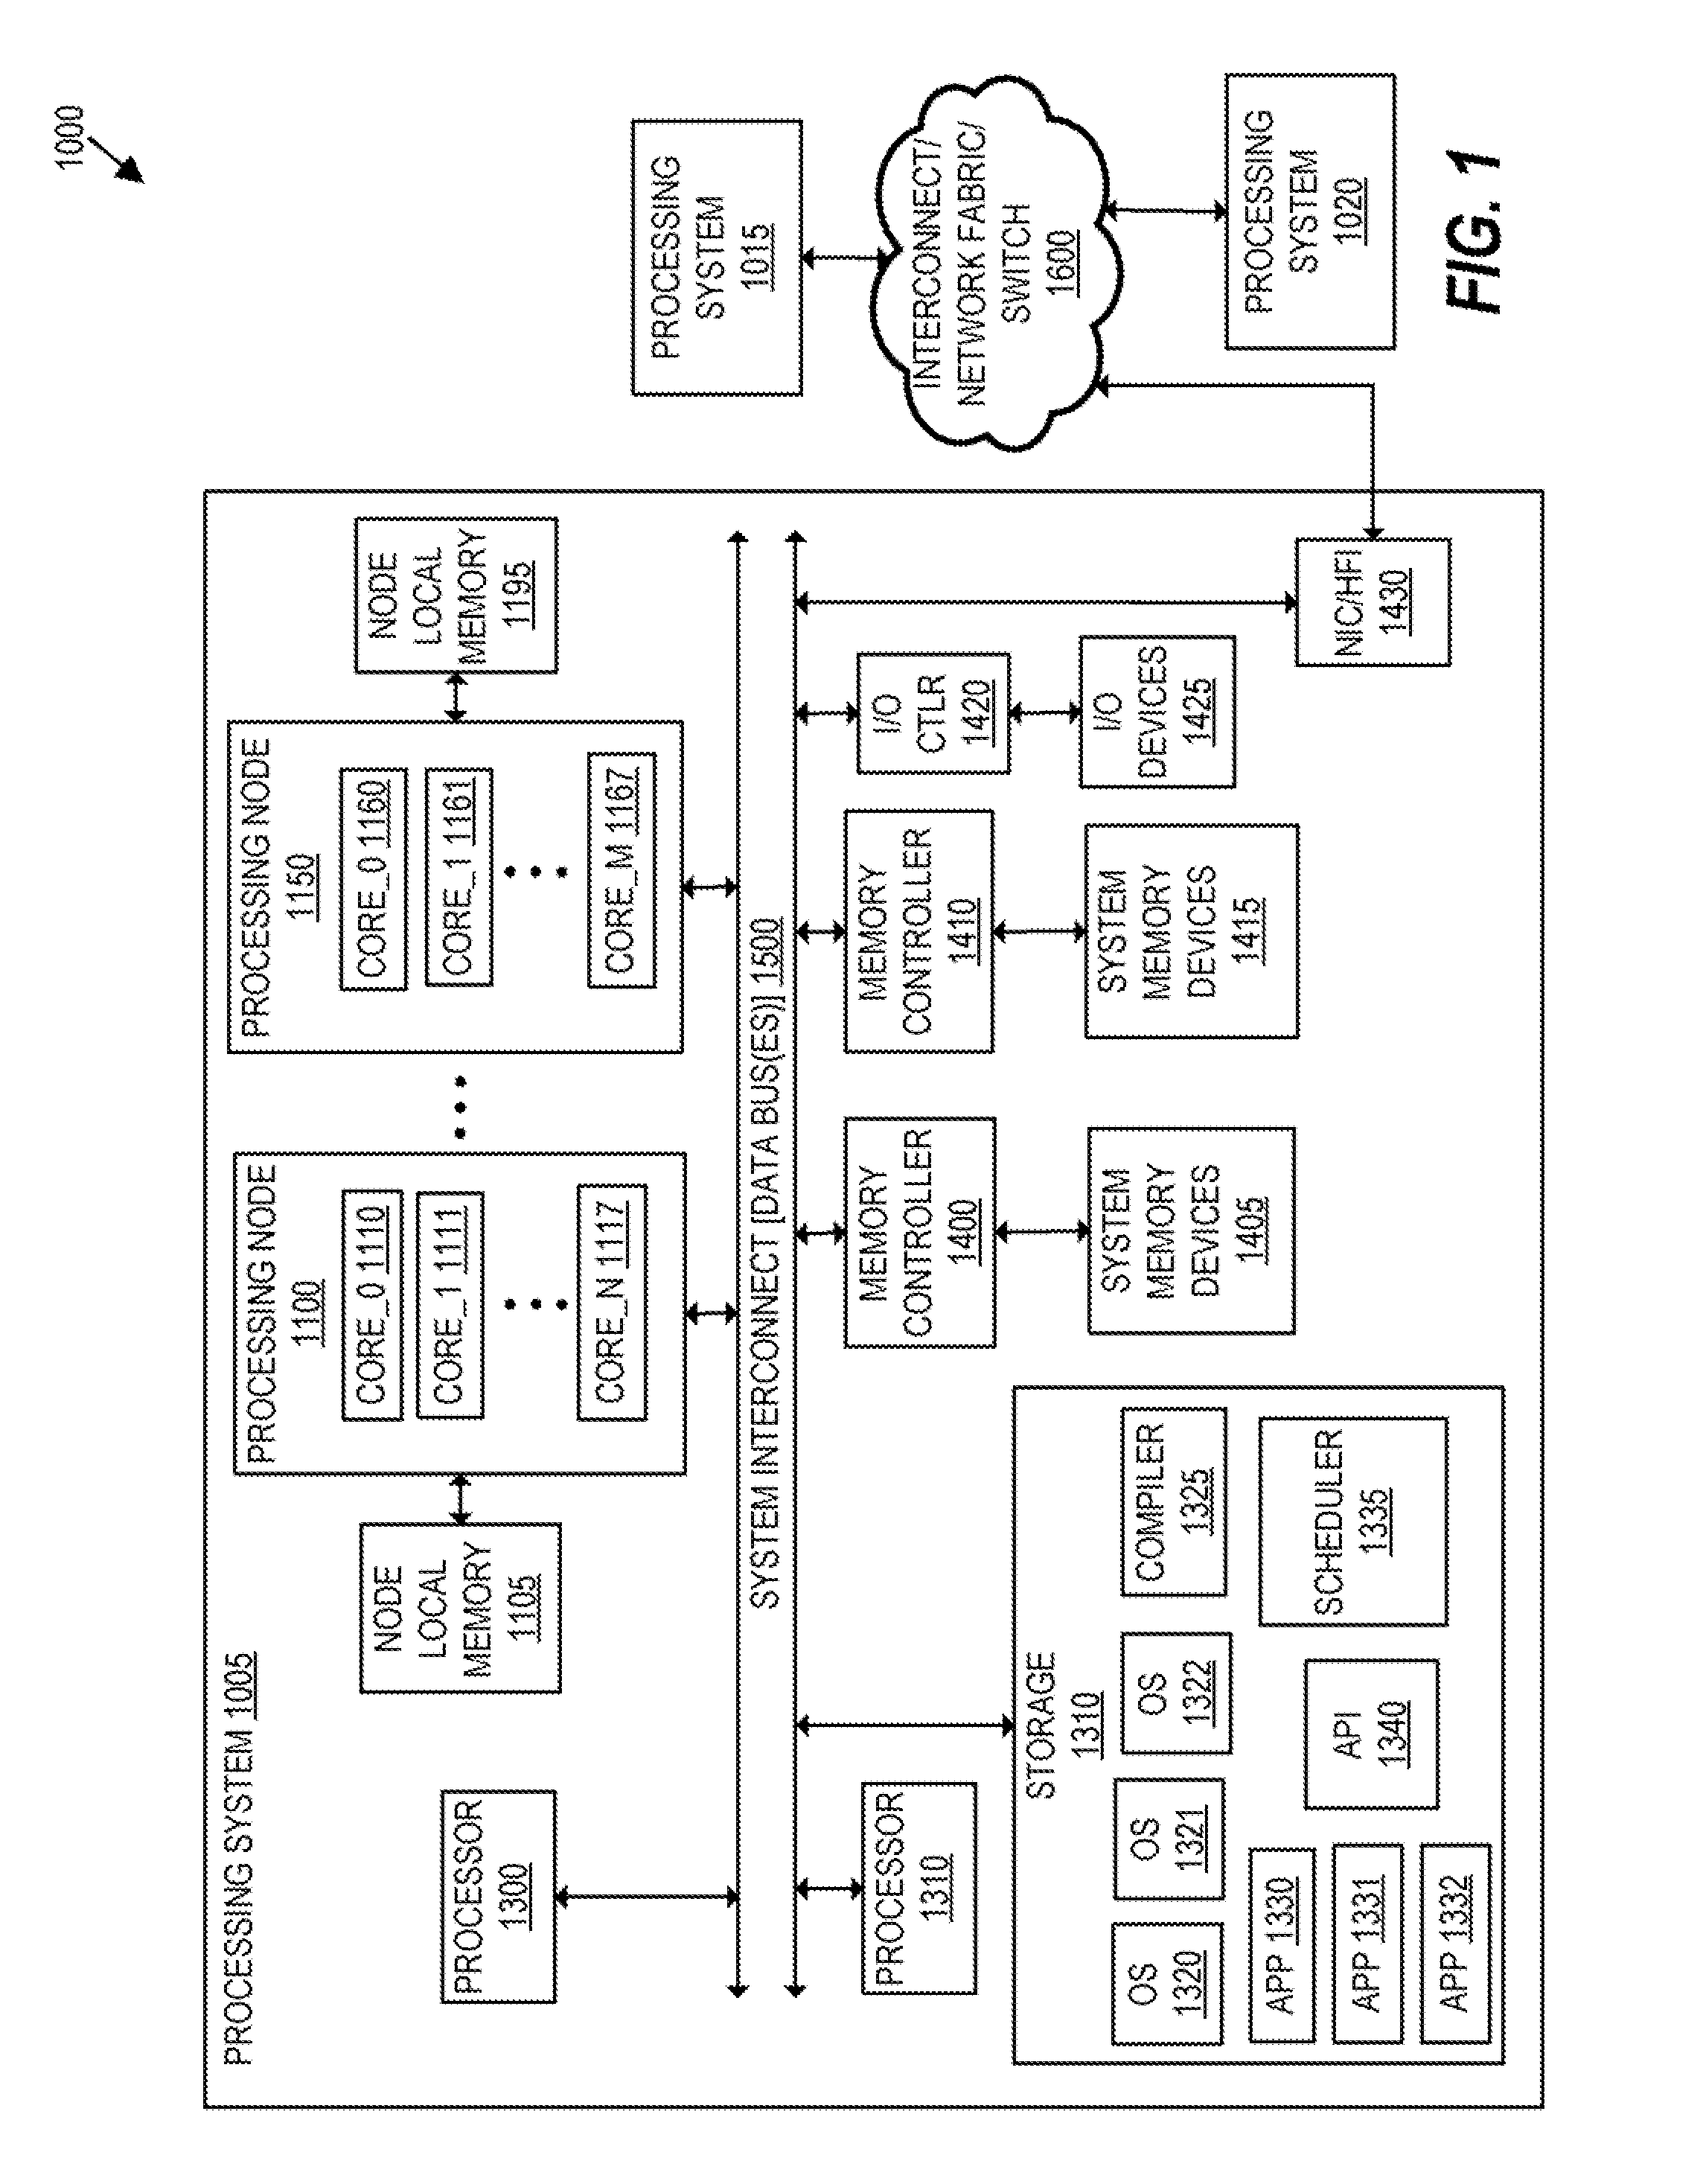 Method to customize function behavior based on cache and scheduling parameters of a memory argument